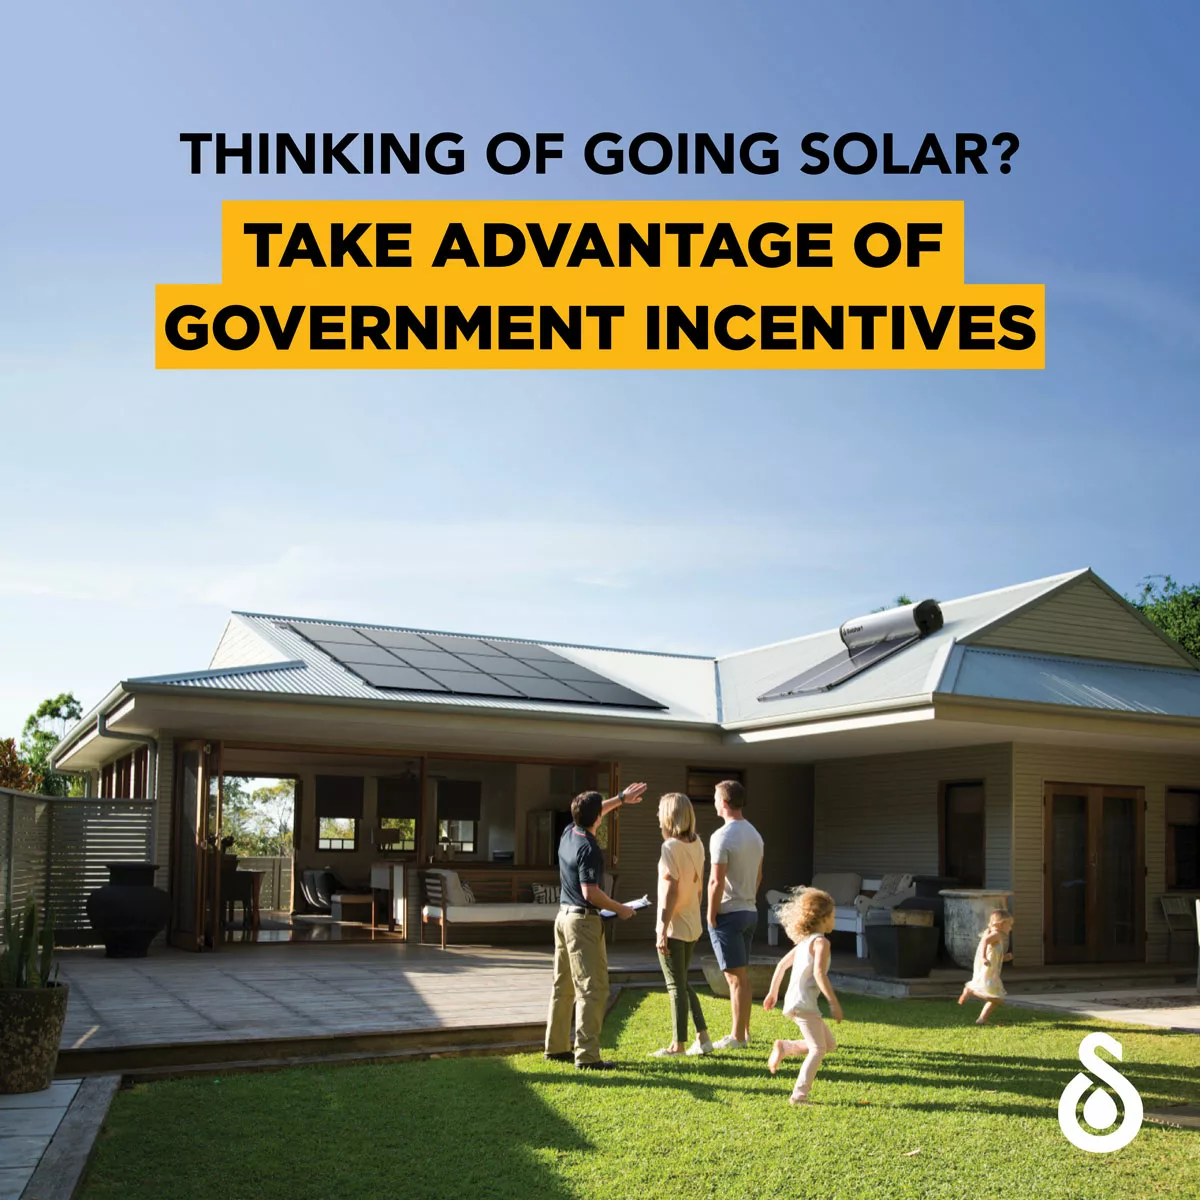 government incentives thinking of going solar jpeg